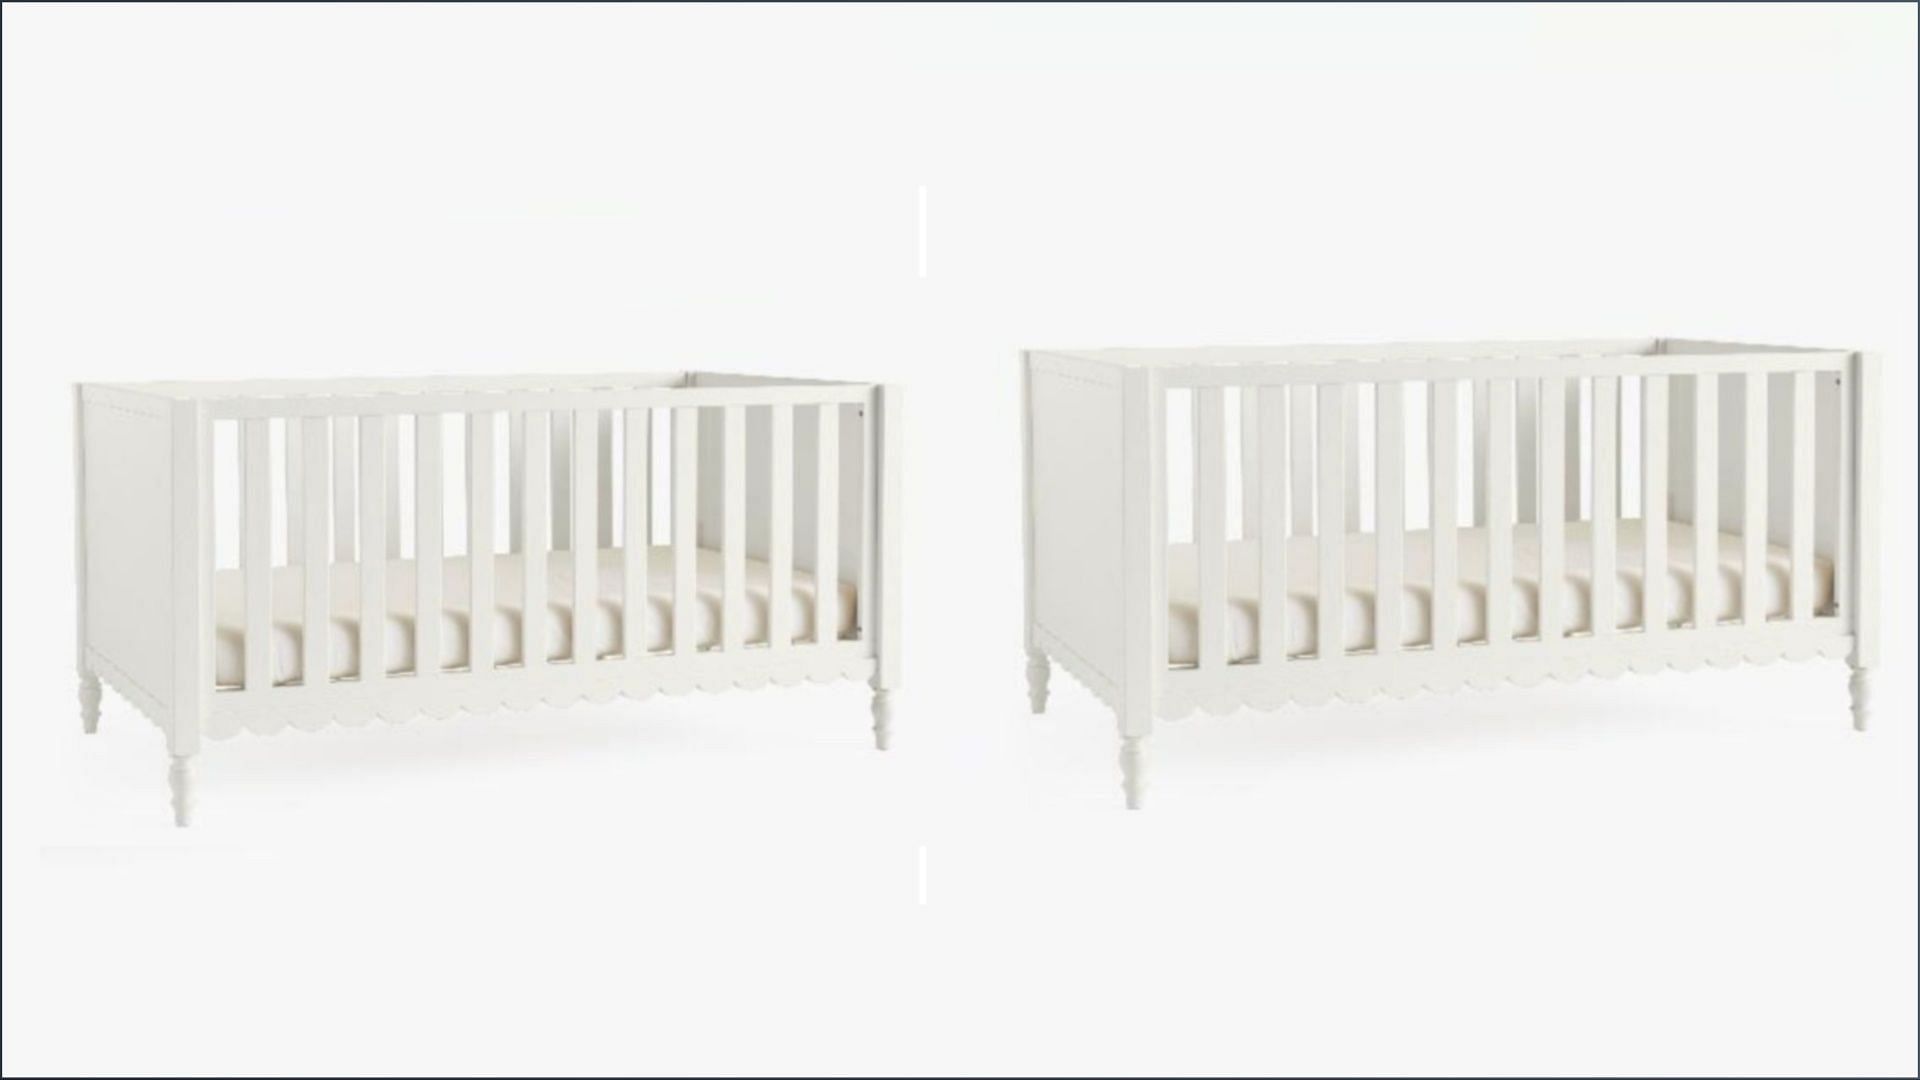 The recalled Kids Penny Convertible Cribs may pose laceration risks to small children and babies (Image via Consumer Products Safety Commission)